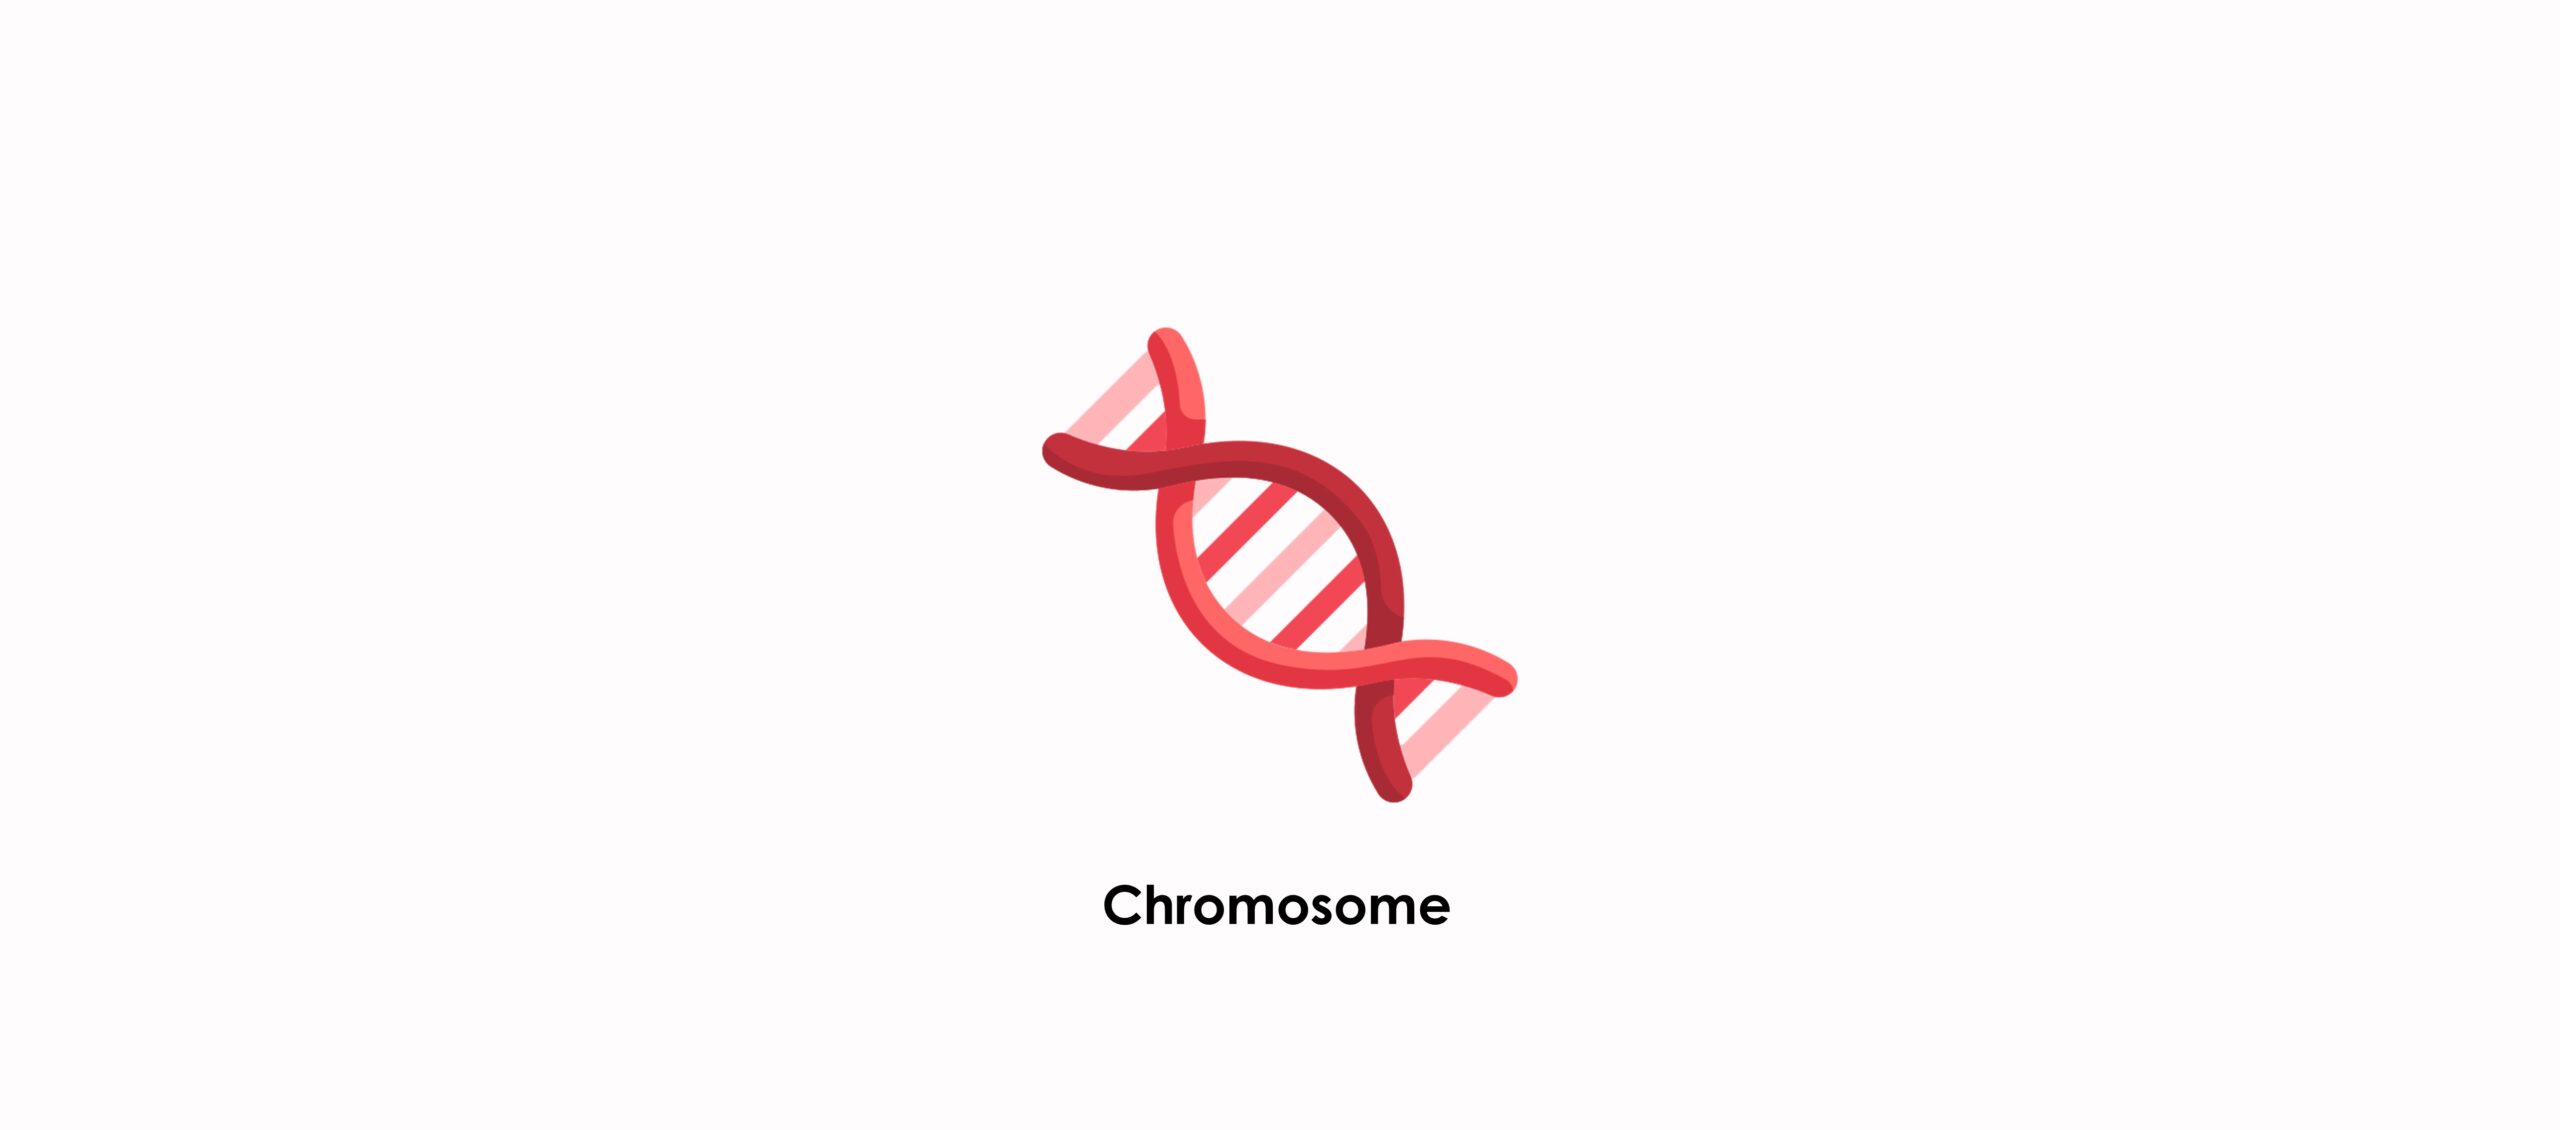 In most cases it is recommended that the woman undergo a karyotype (study of the chromosomes in the blood)